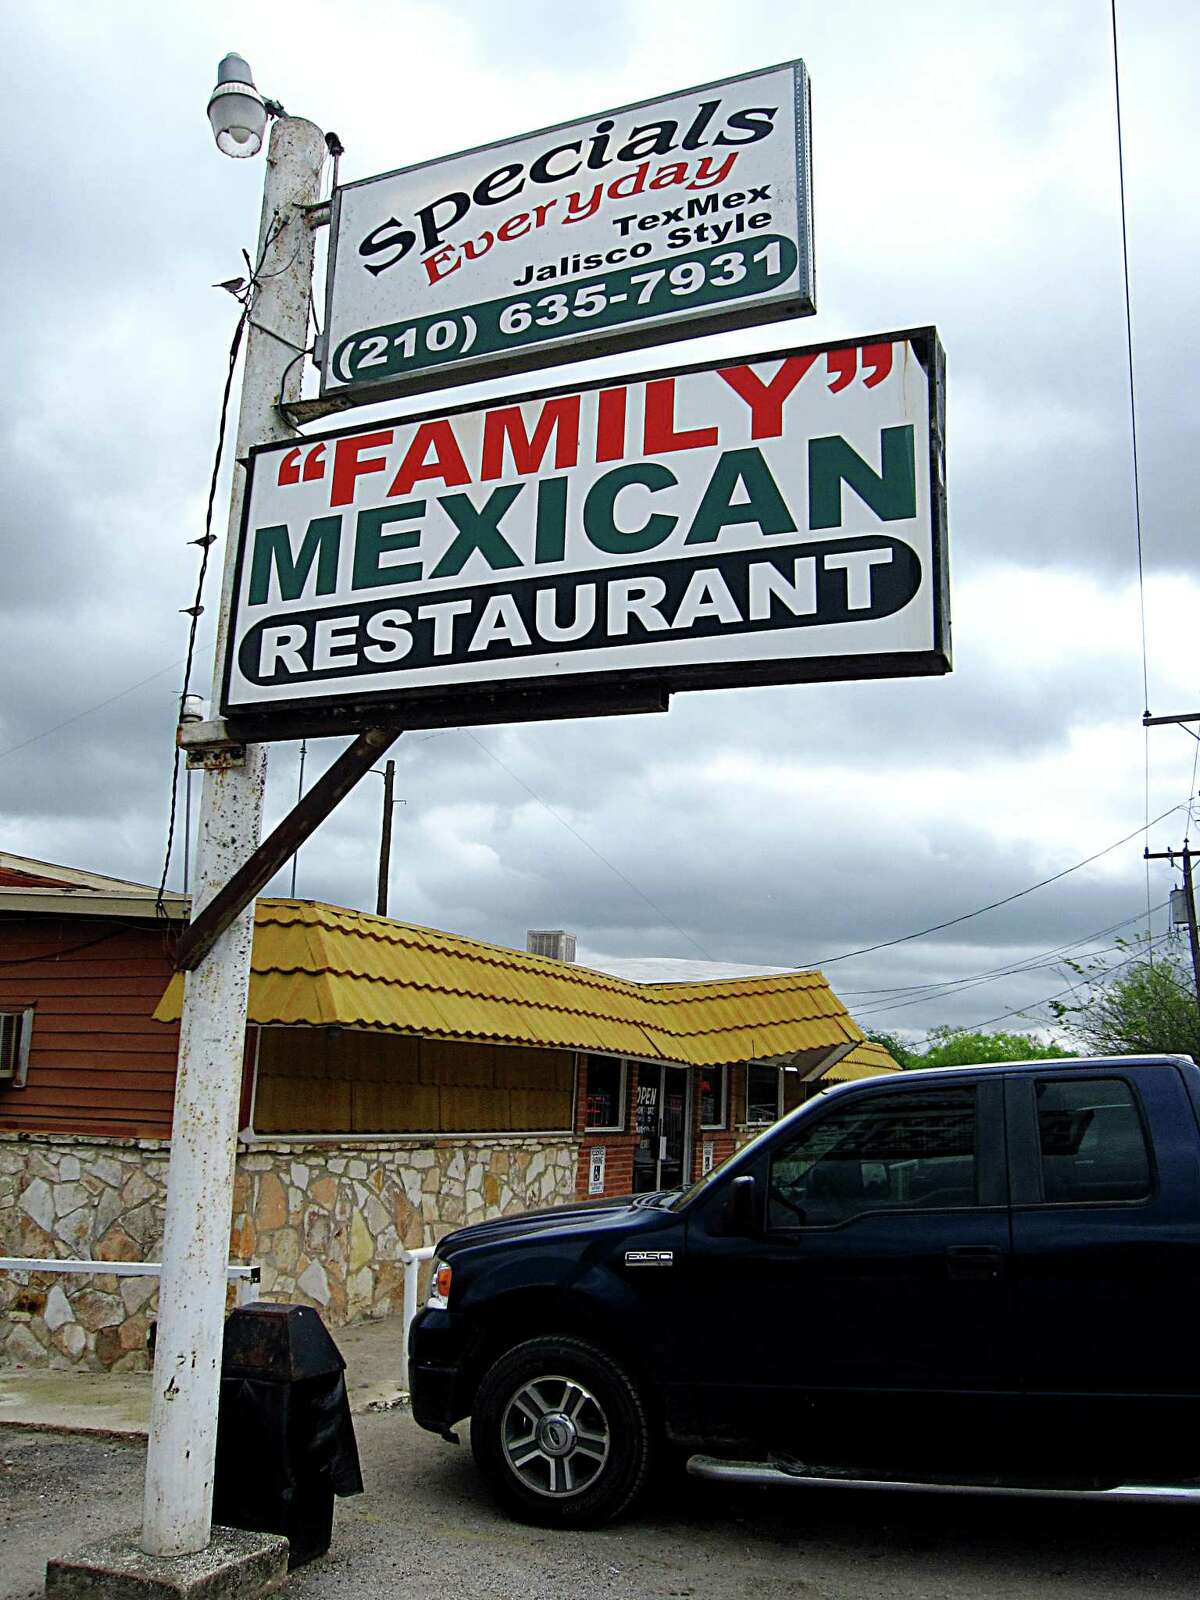 Family Mexican Restaurant on U.S. 181 South.